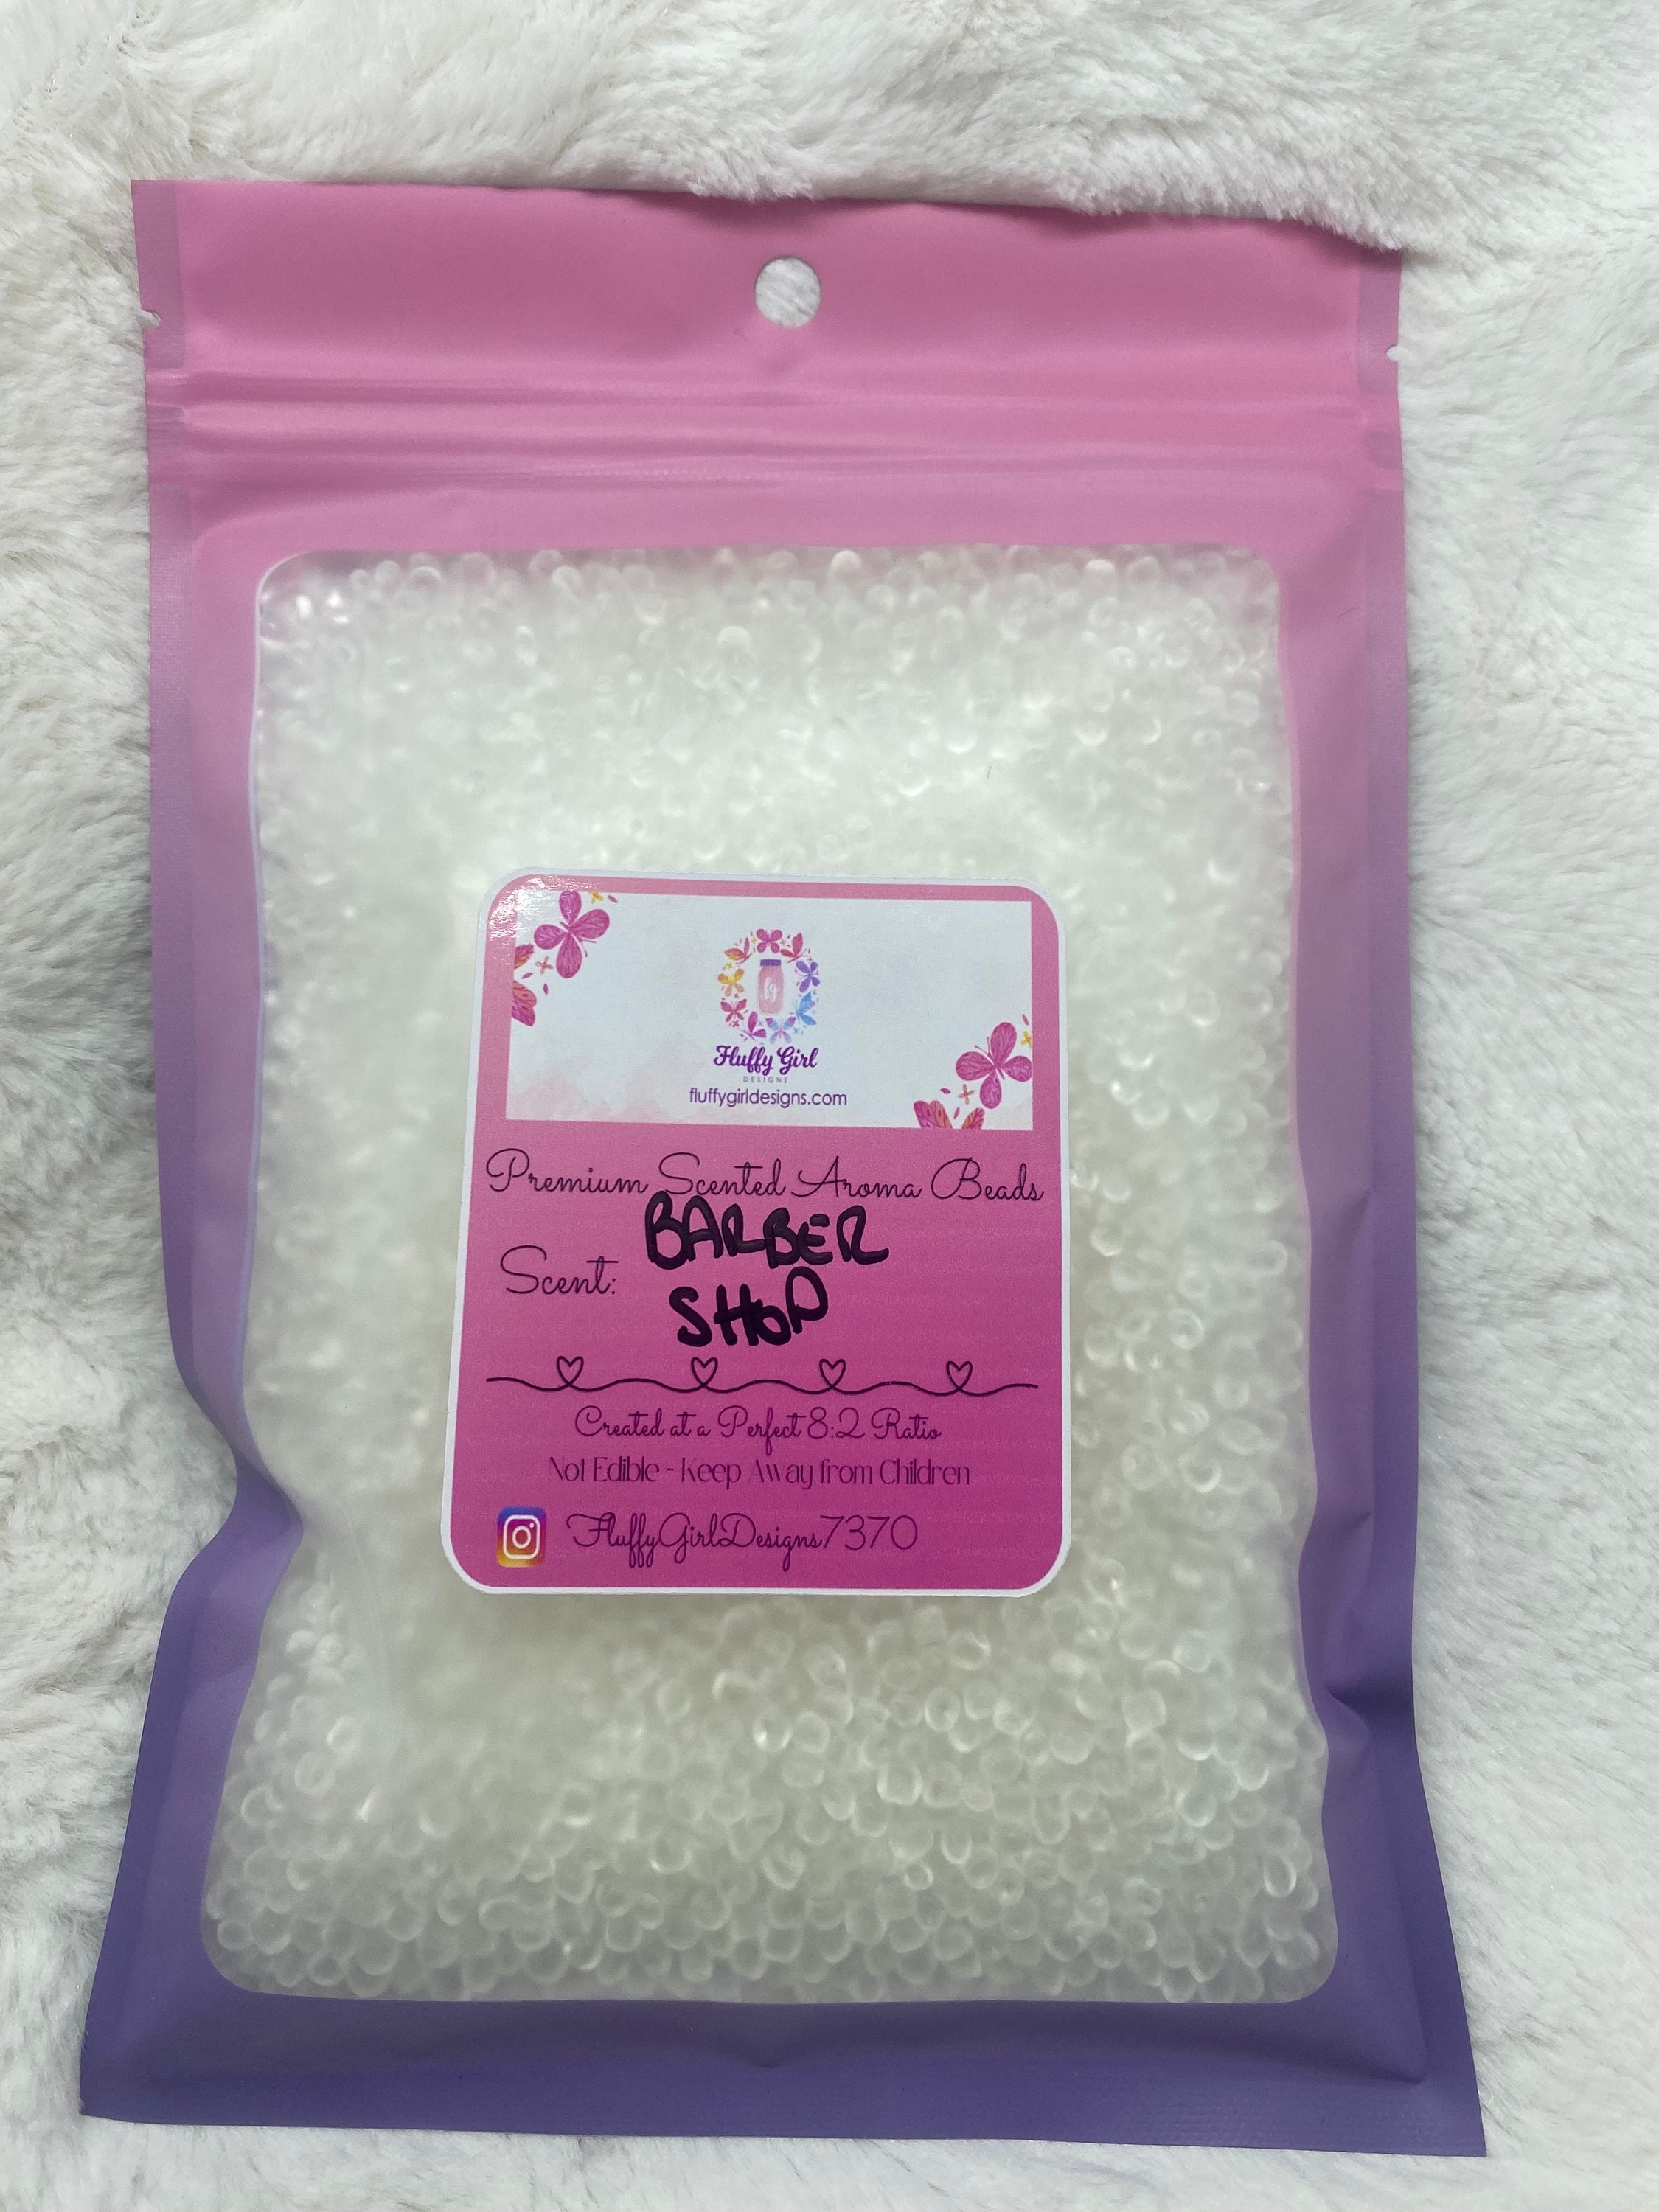 Honolulu Sun Cured Scented Premium Aroma Beads For Air Fresheners